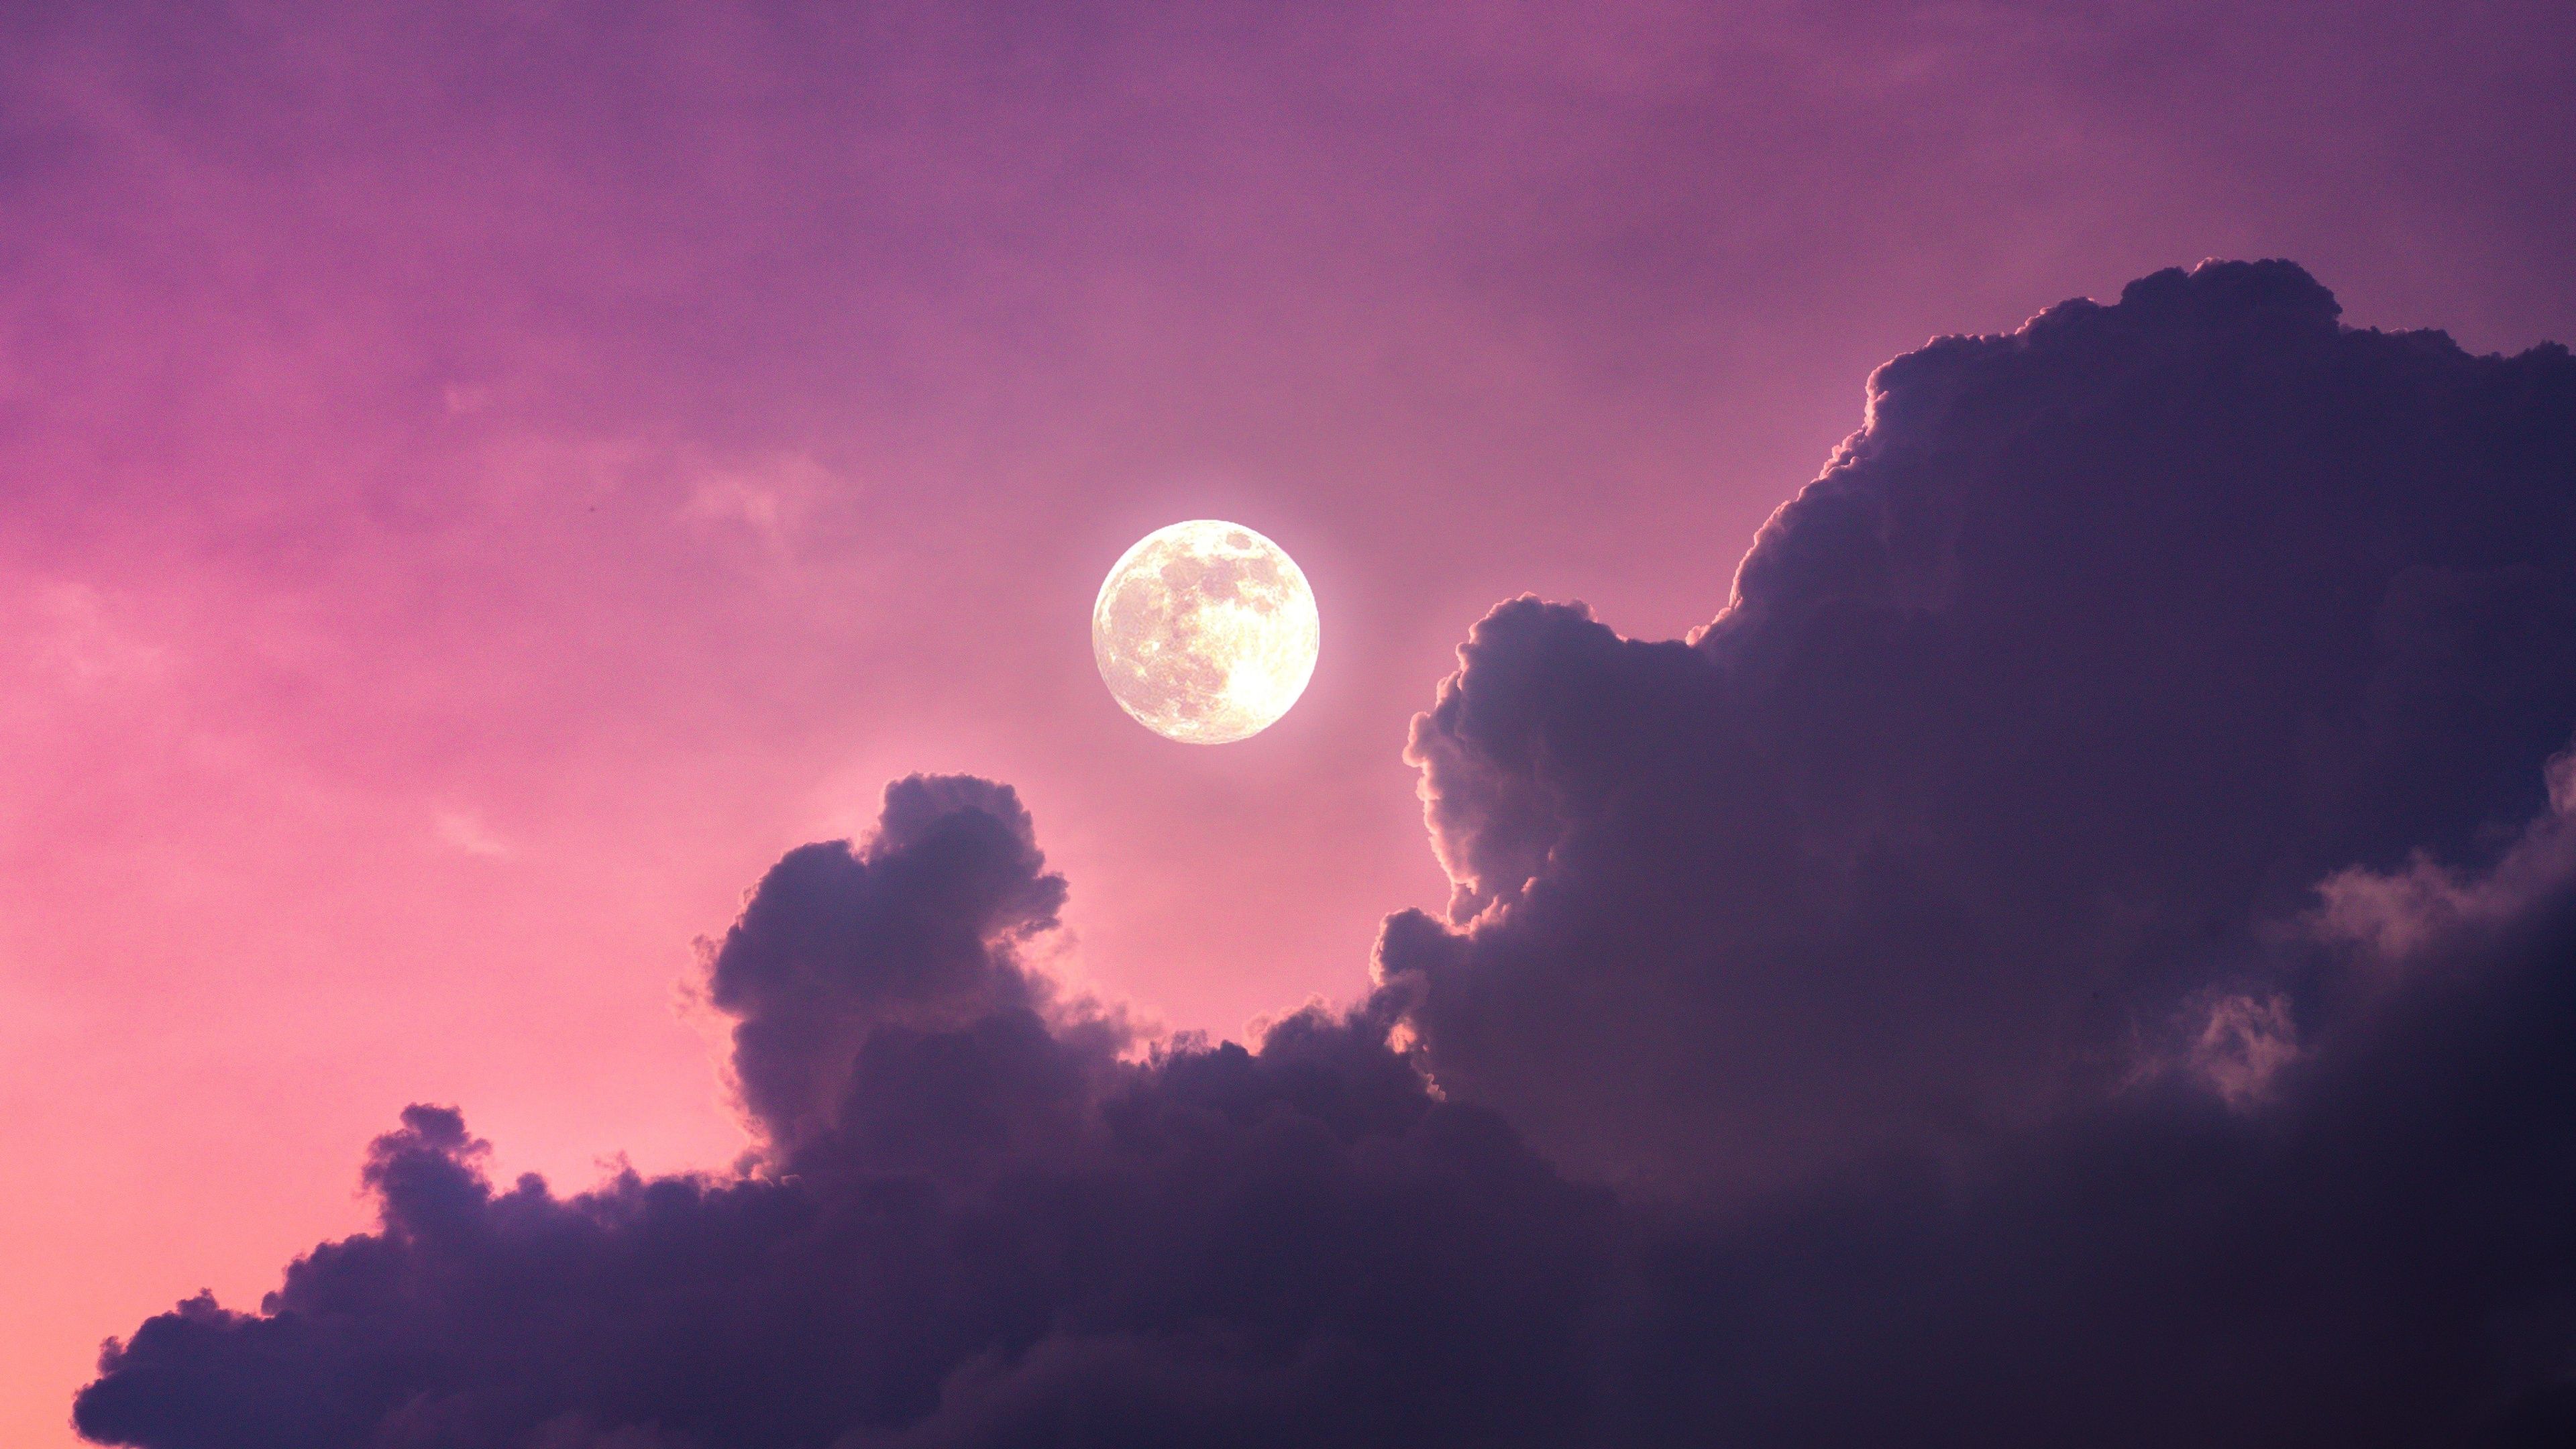 A full moon is in the sky - Scenery, moon phases, HD, landscape, sky